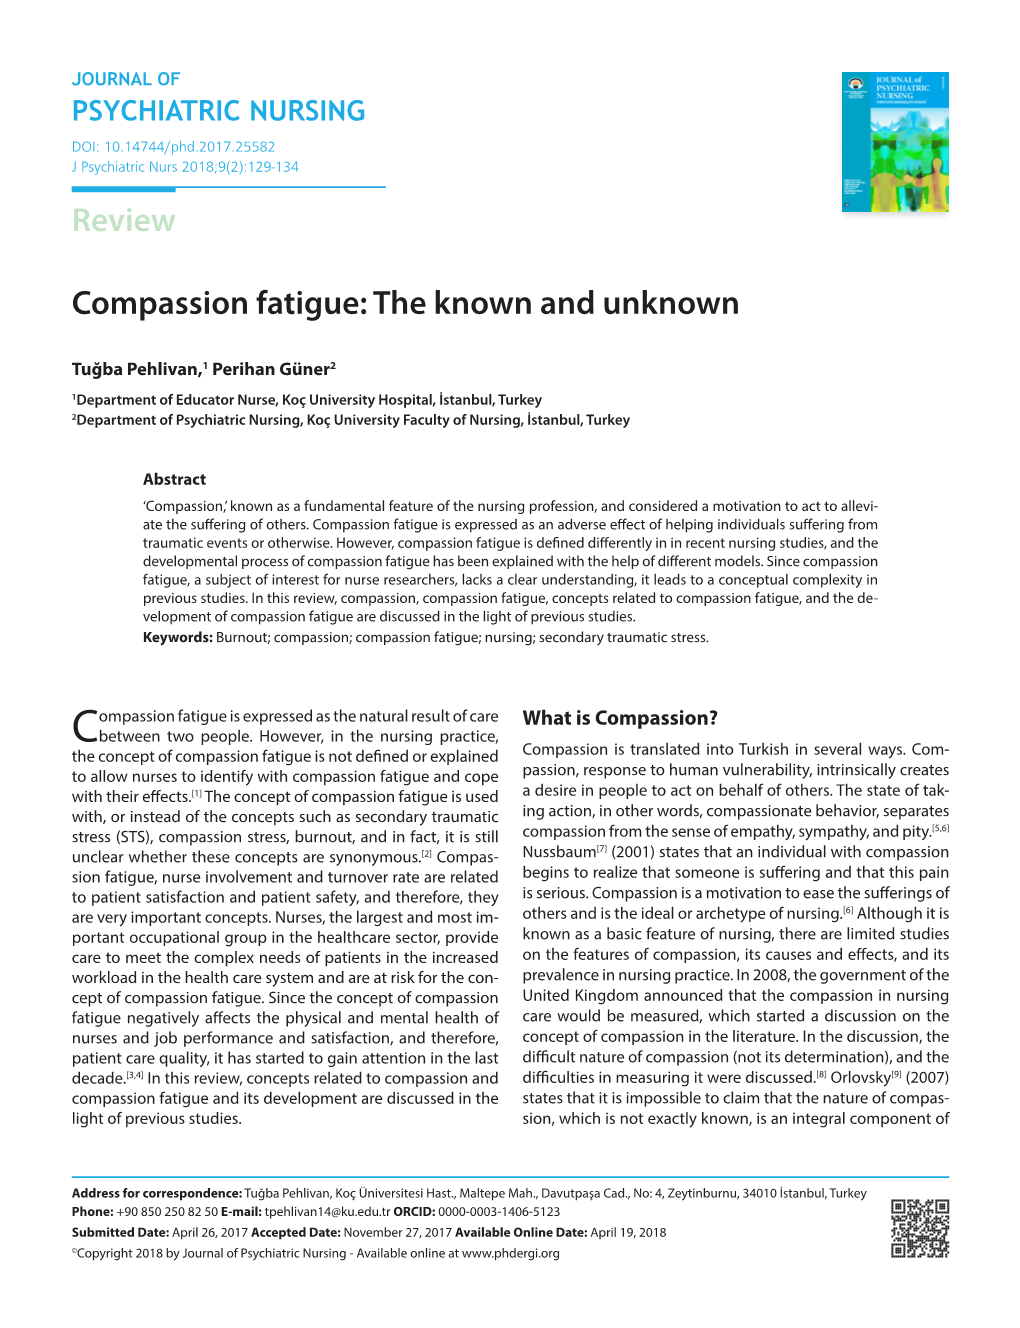 Review Compassion Fatigue: the Known and Unknown